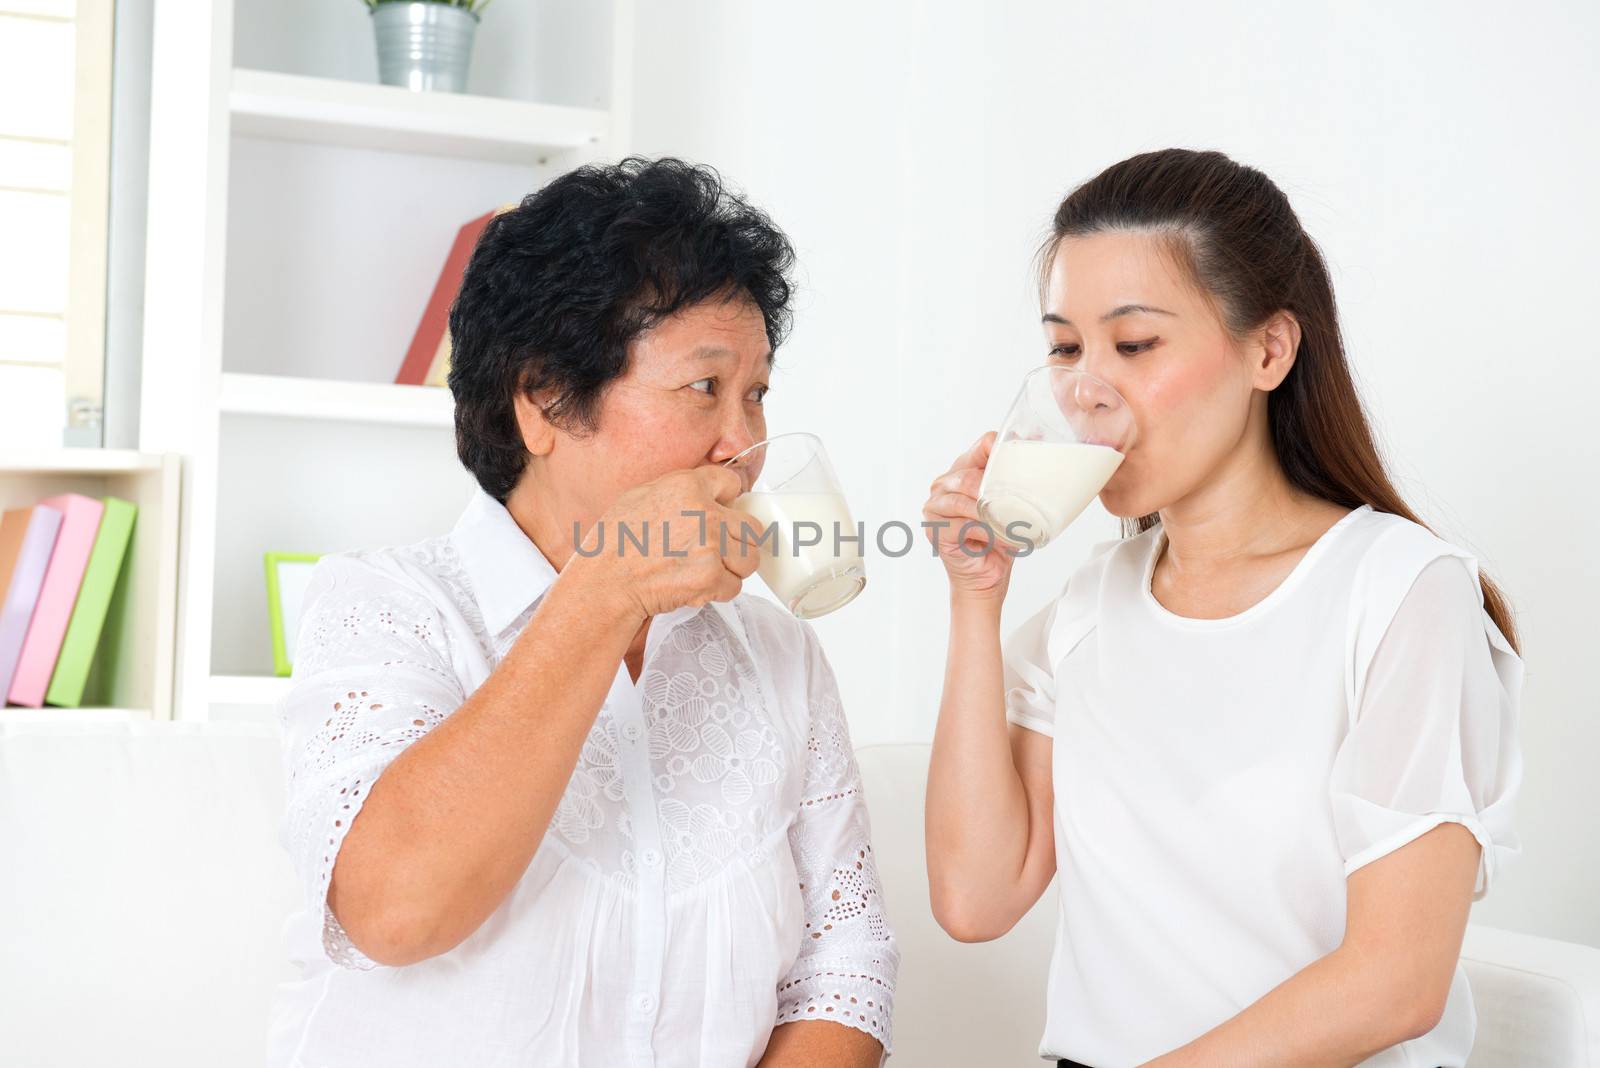 Drinking milk. Happy Asian family drinking milk at home. Beautiful senior mother and adult daughter, healthcare concept.